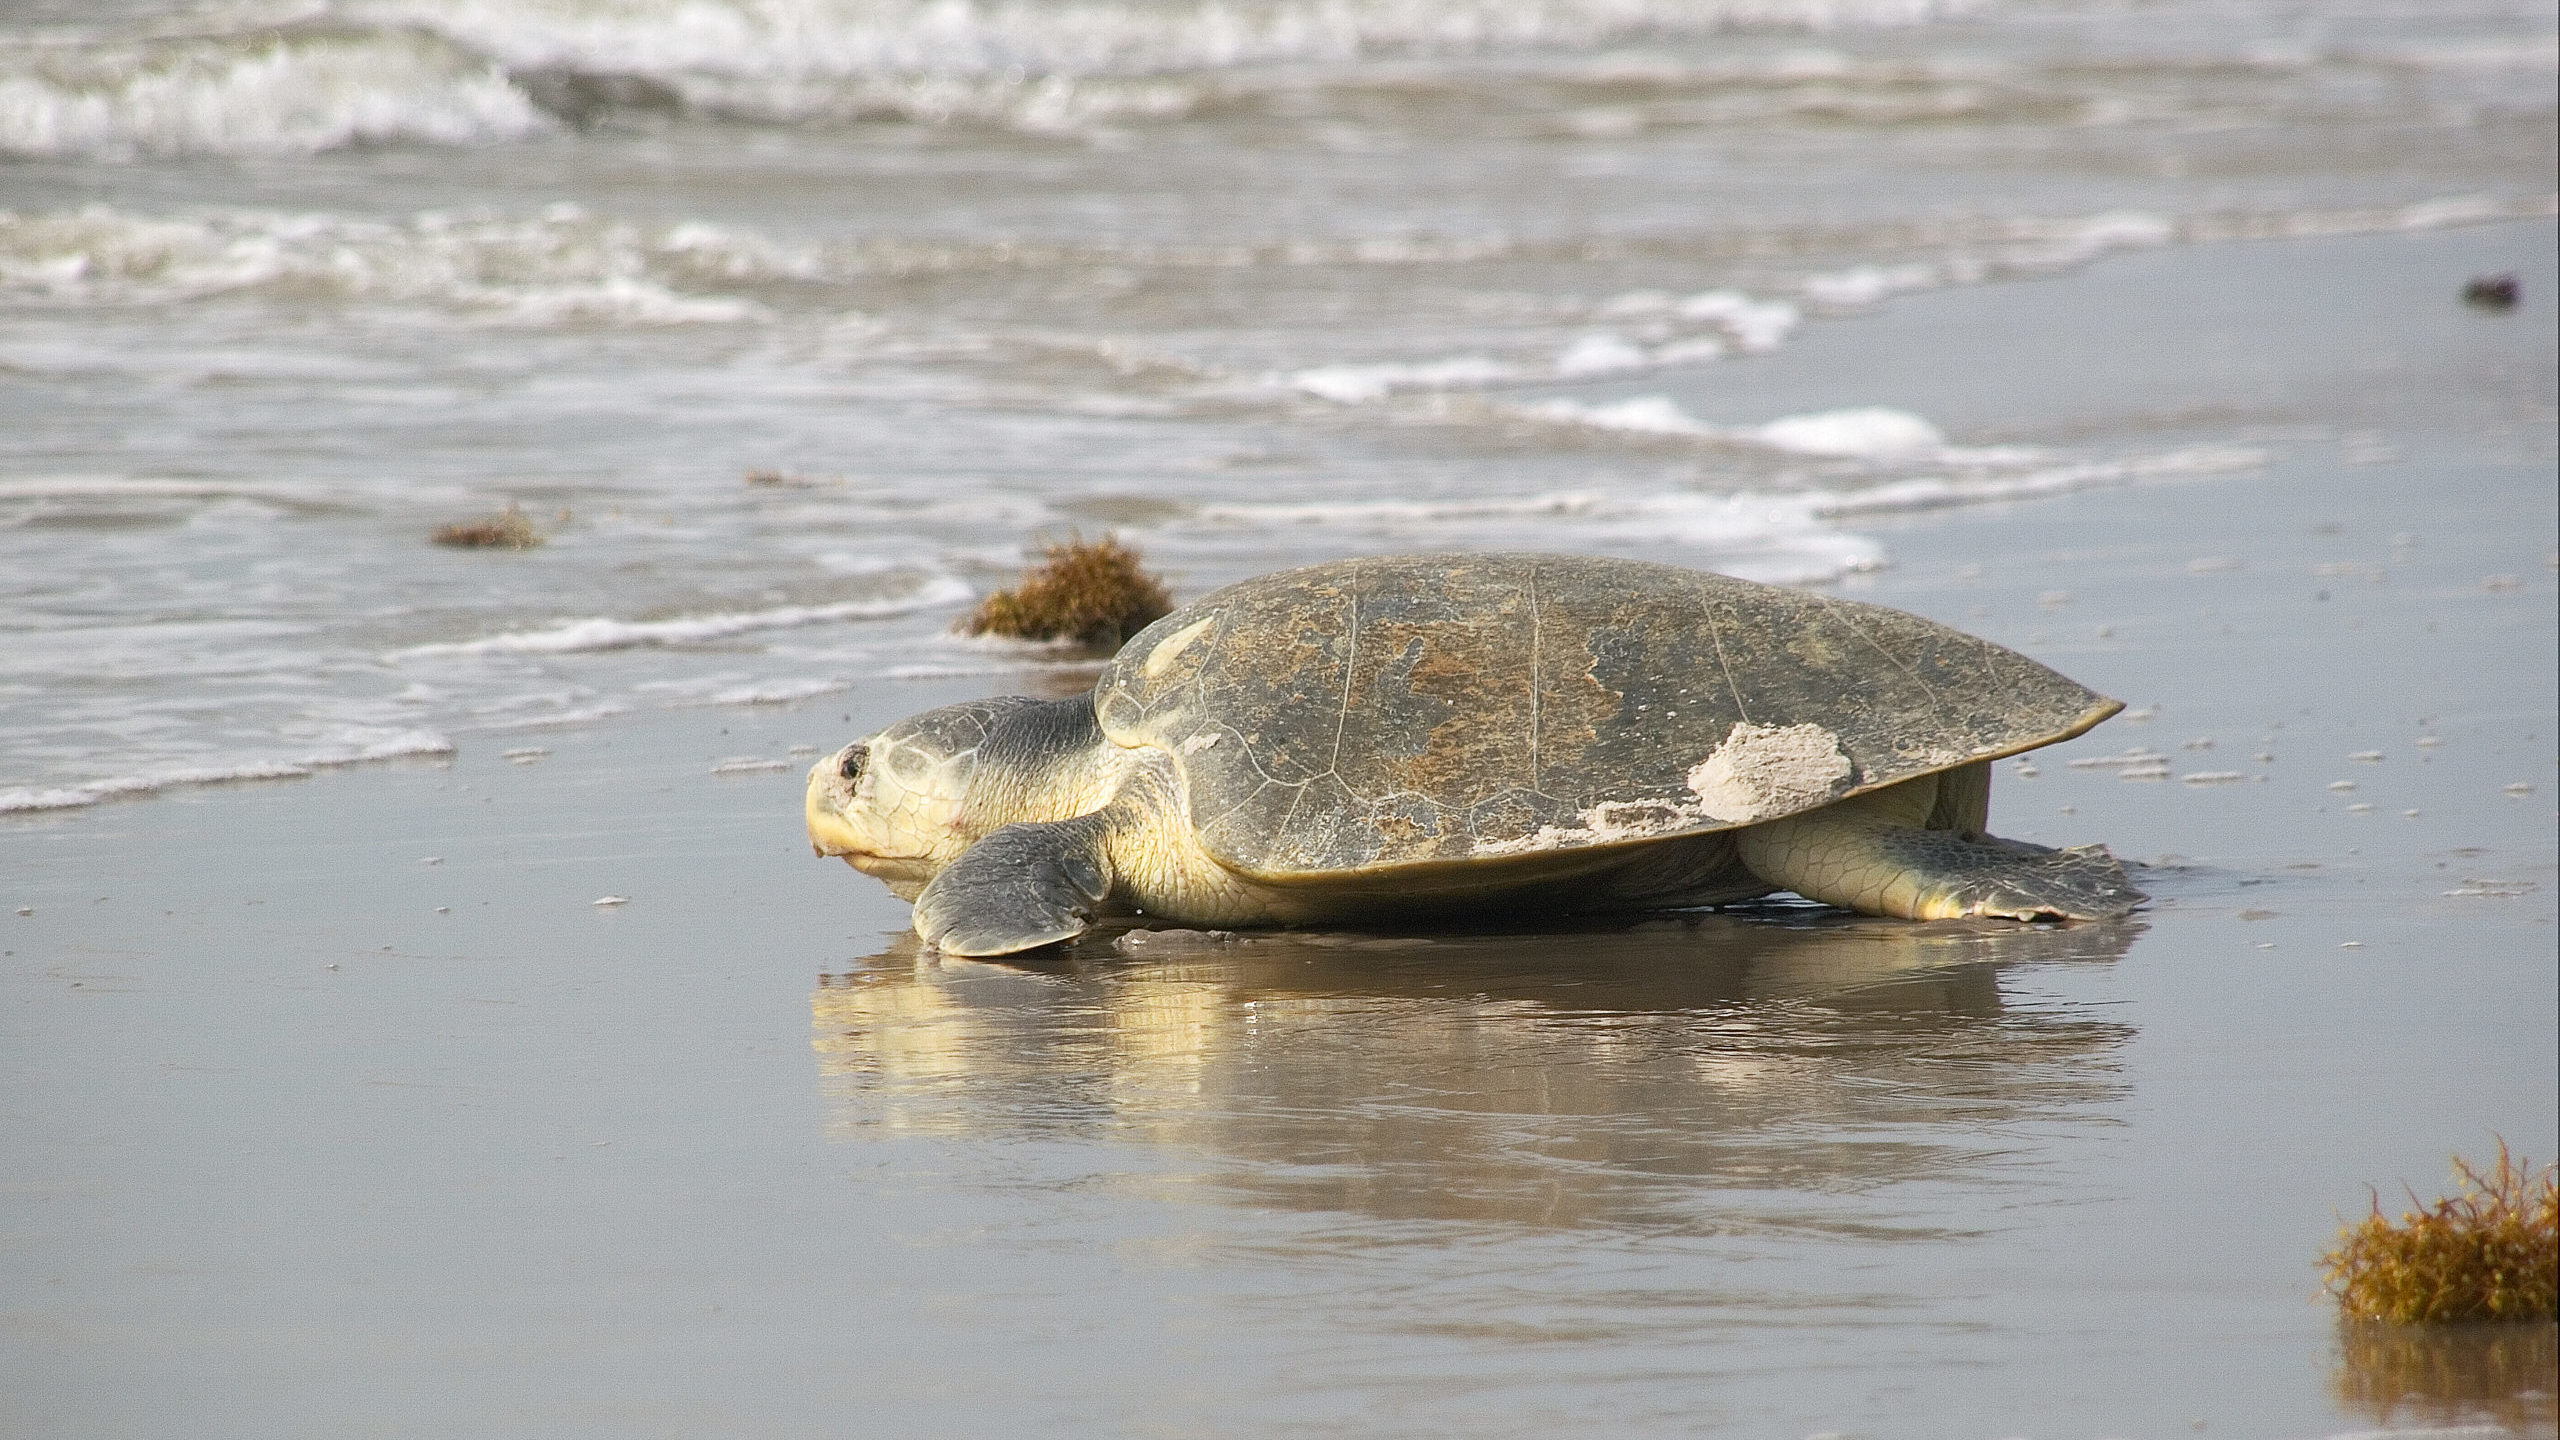 Kemps ridley sea turtle heads back to gulf after laying eggs.